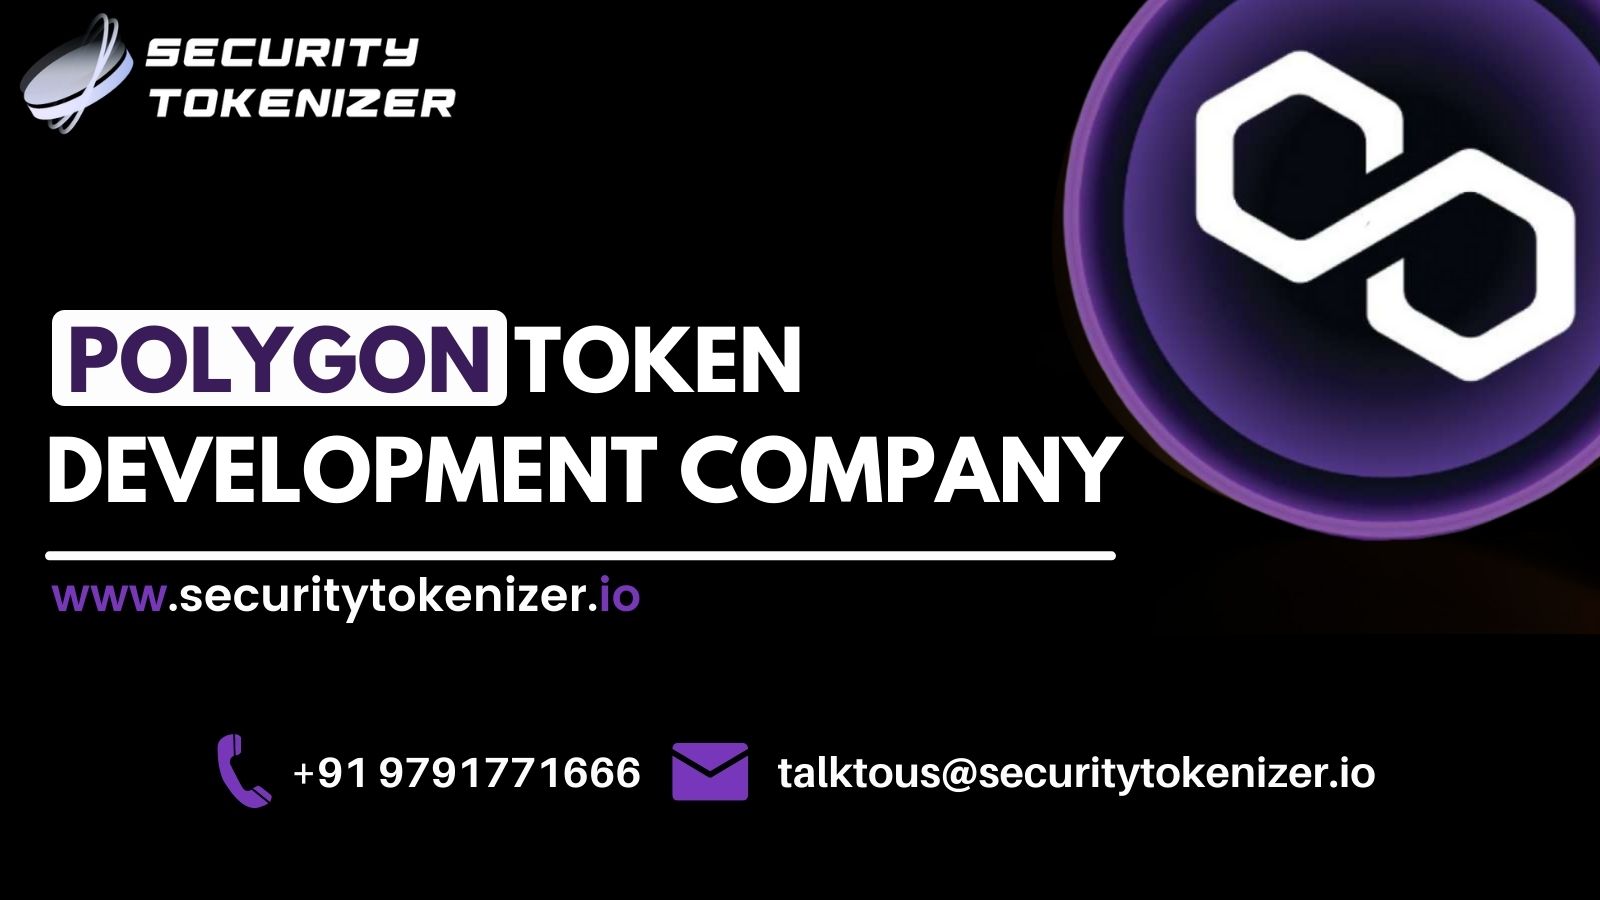 Article about Best Polygon Token Development Company - Security Tokenizer